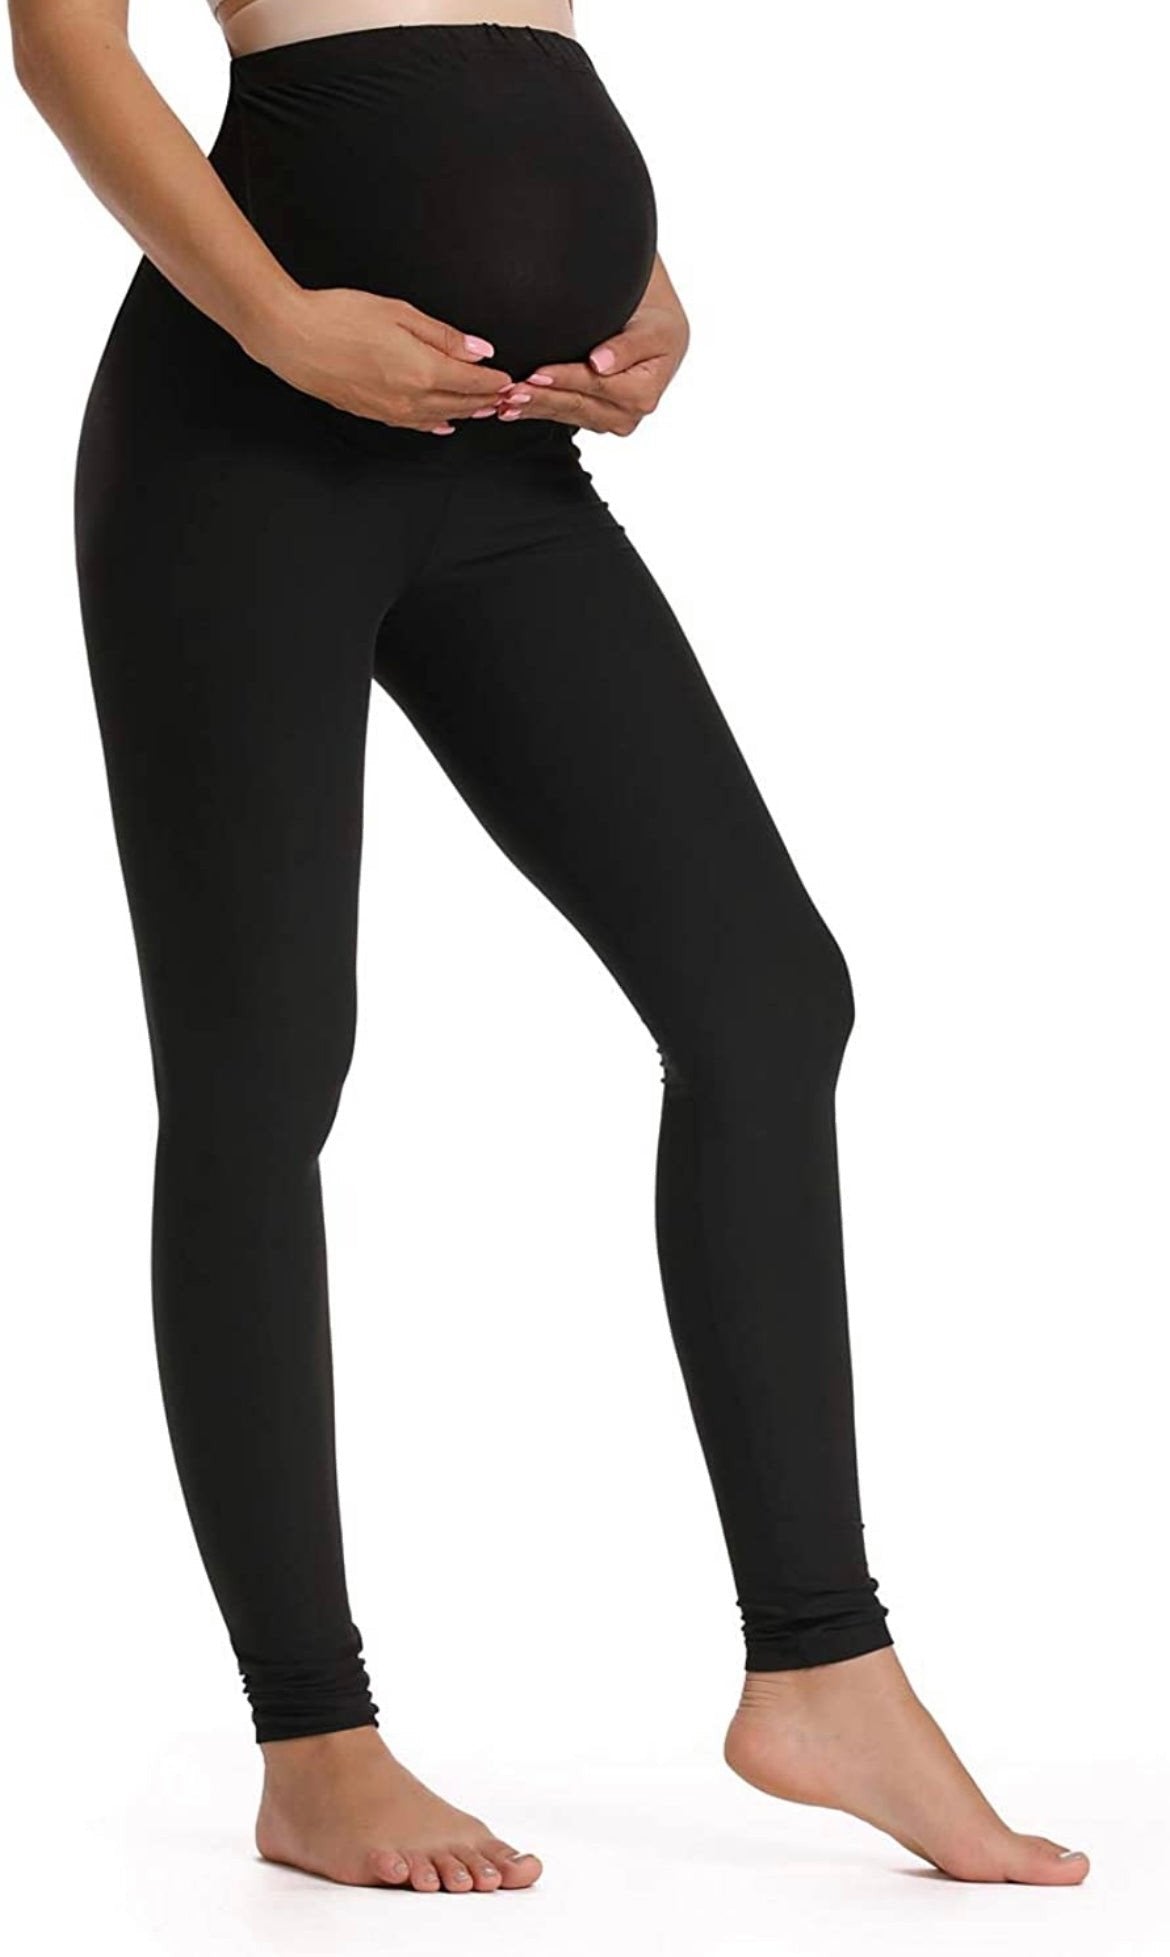 Over-The-Belly Pregnancy Pants for Women in Maternity Leggings by Foucome.